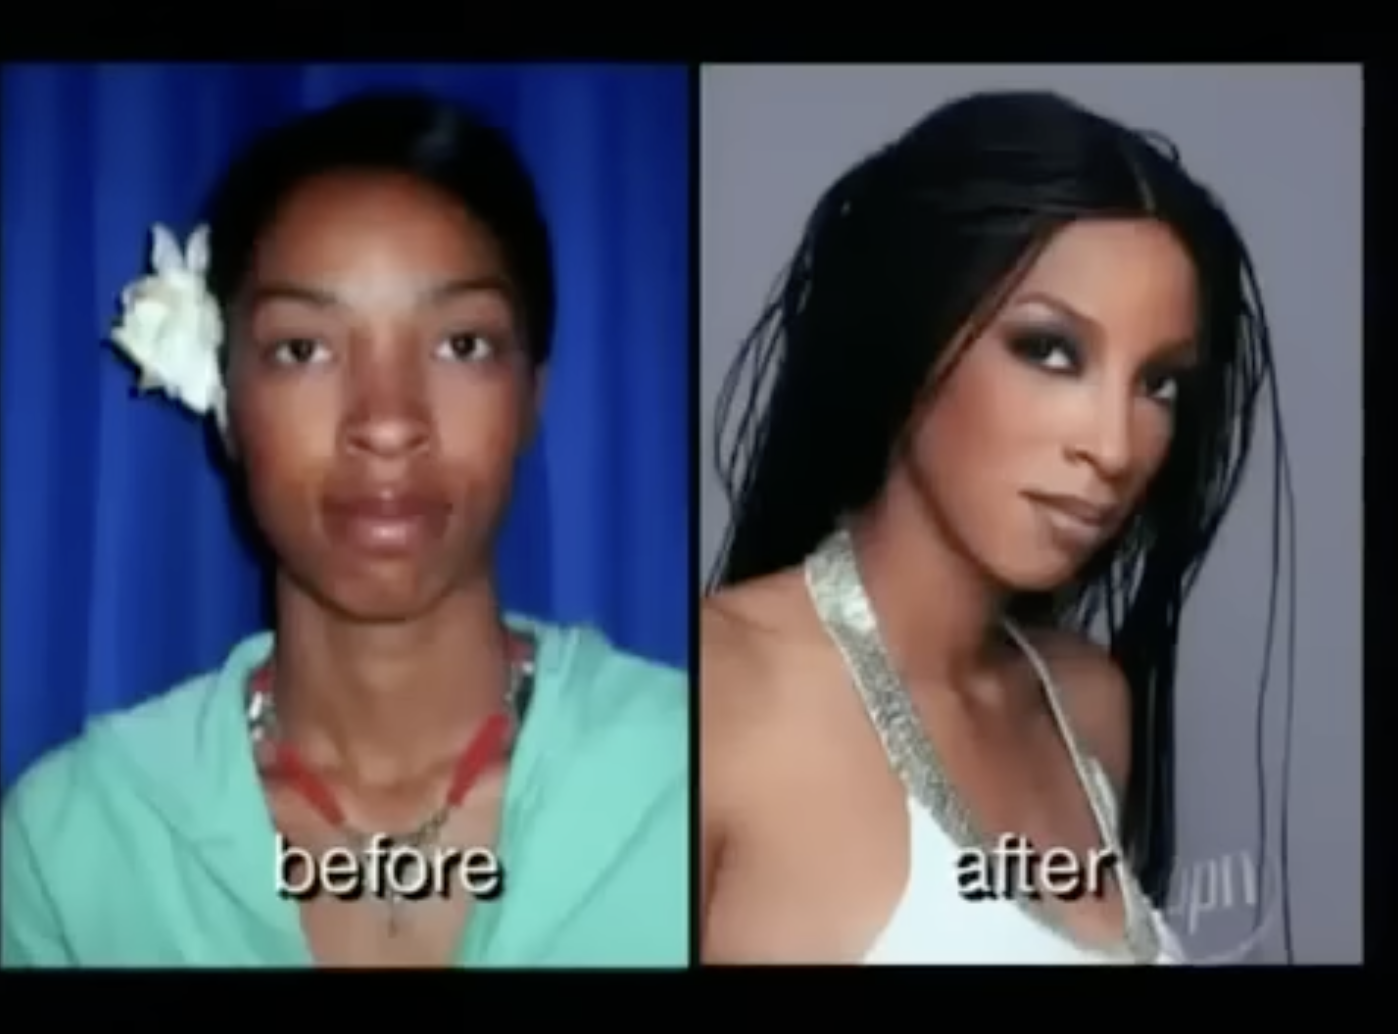 America's Next Top Model: 8 Most Drastic Makeovers